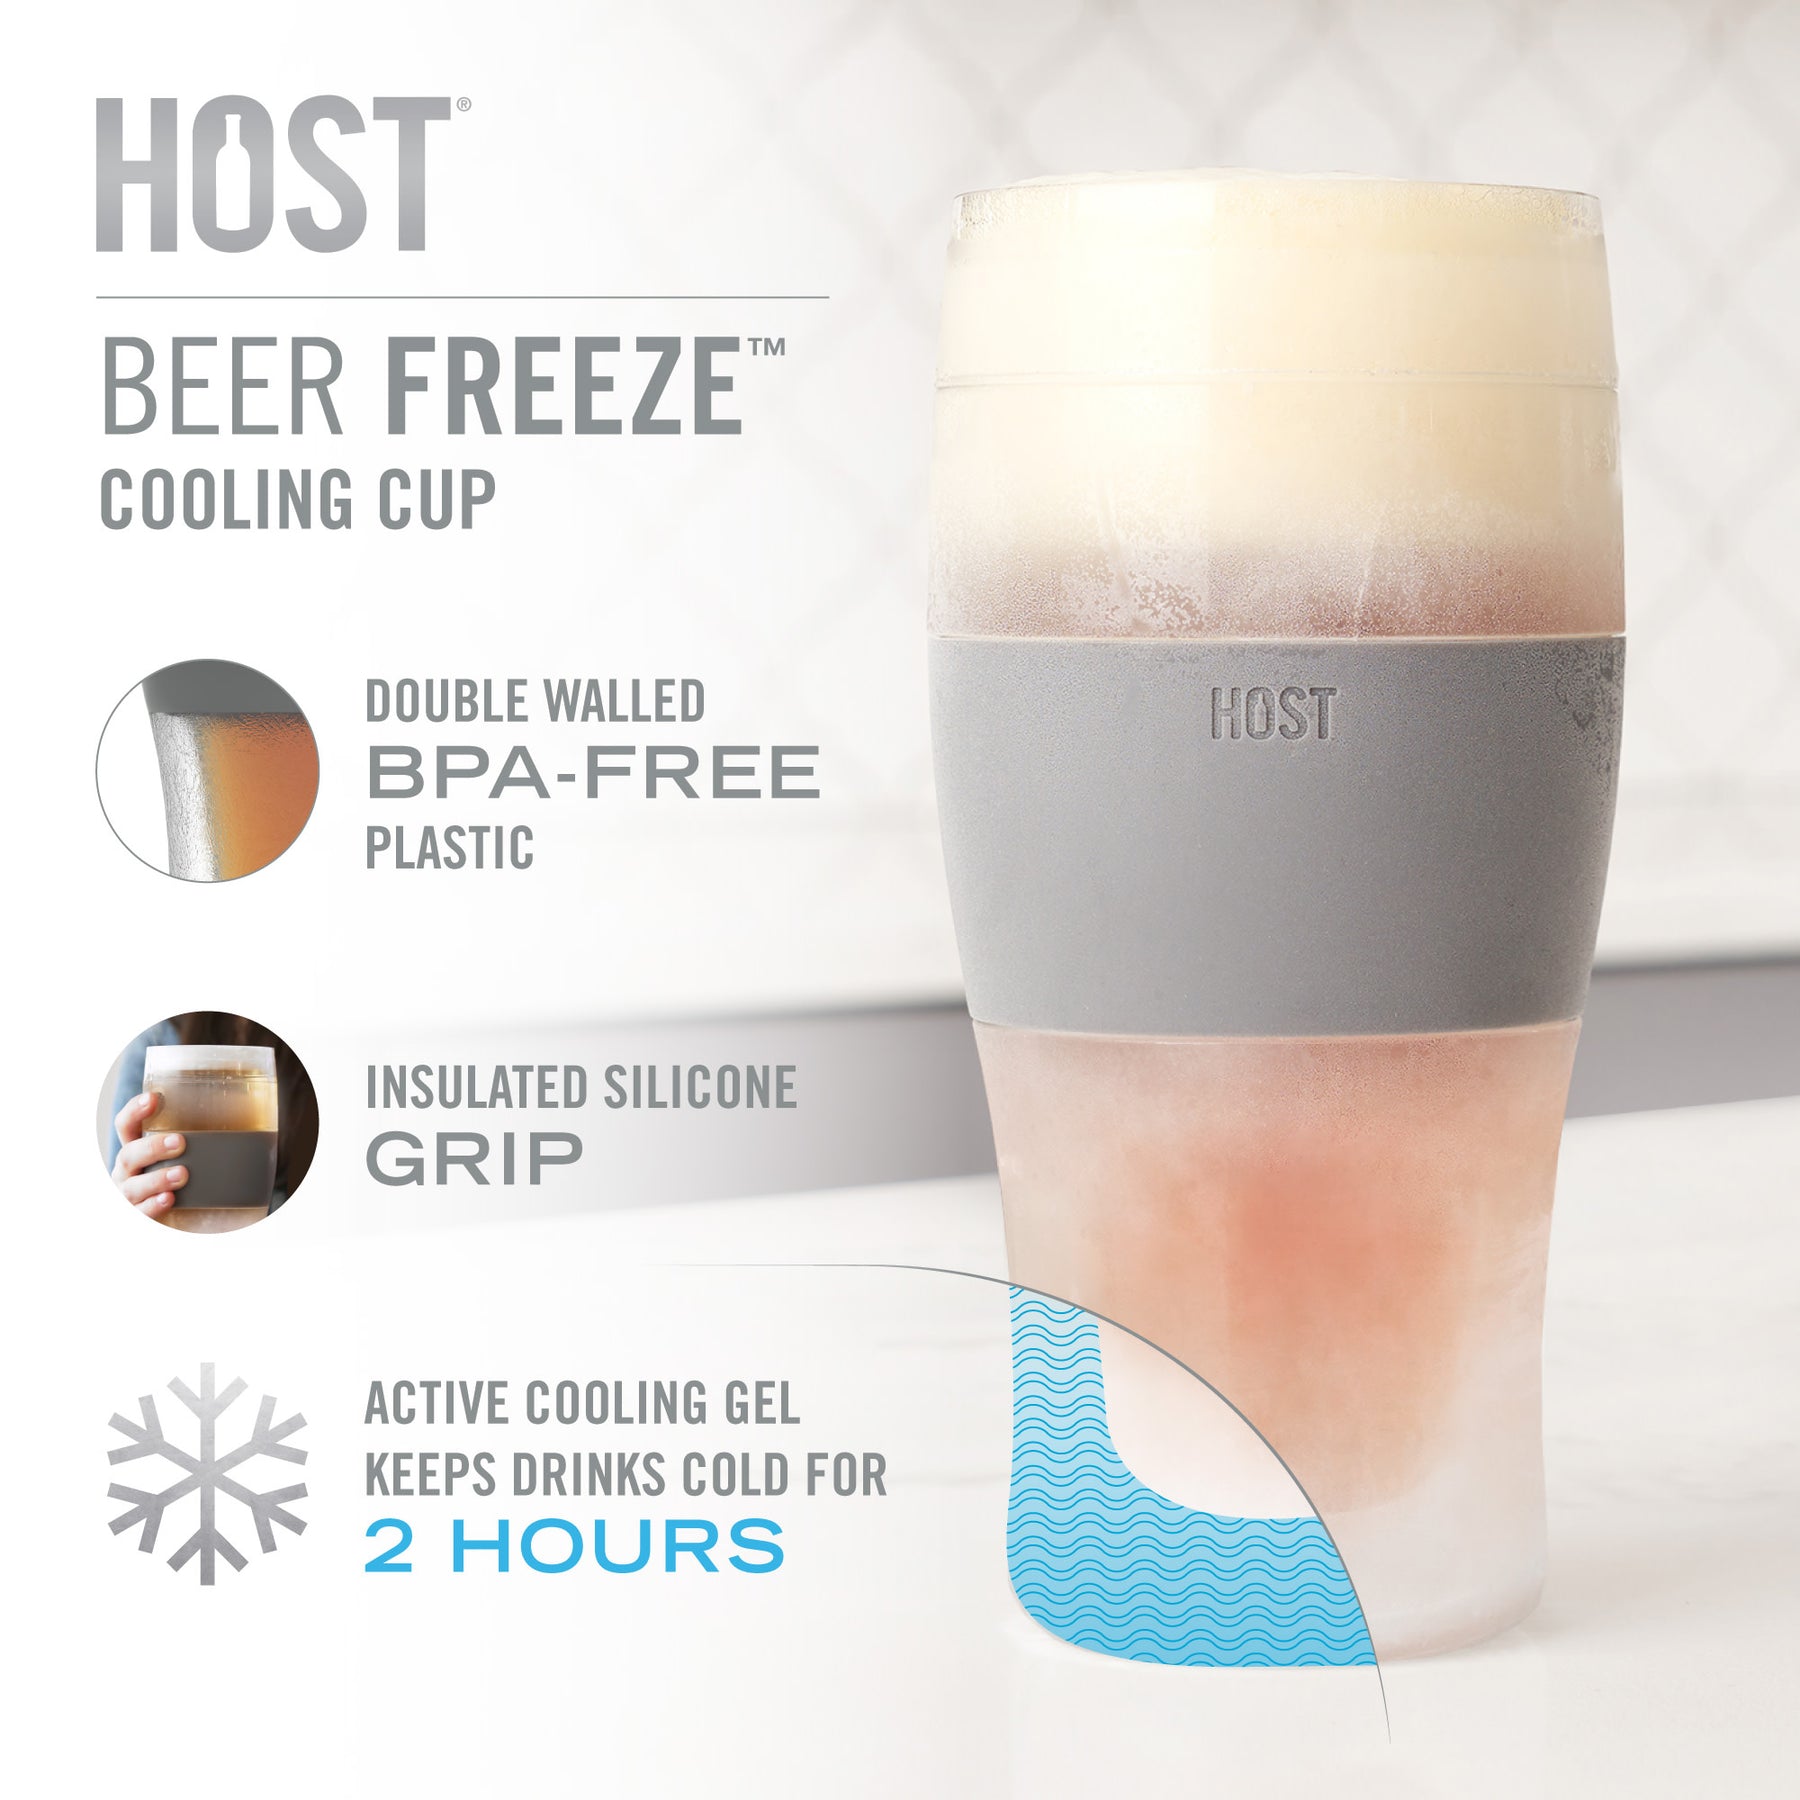 Freezer Ice Beer Mug Double Wall Gel Frosty Beer Cup Drinking